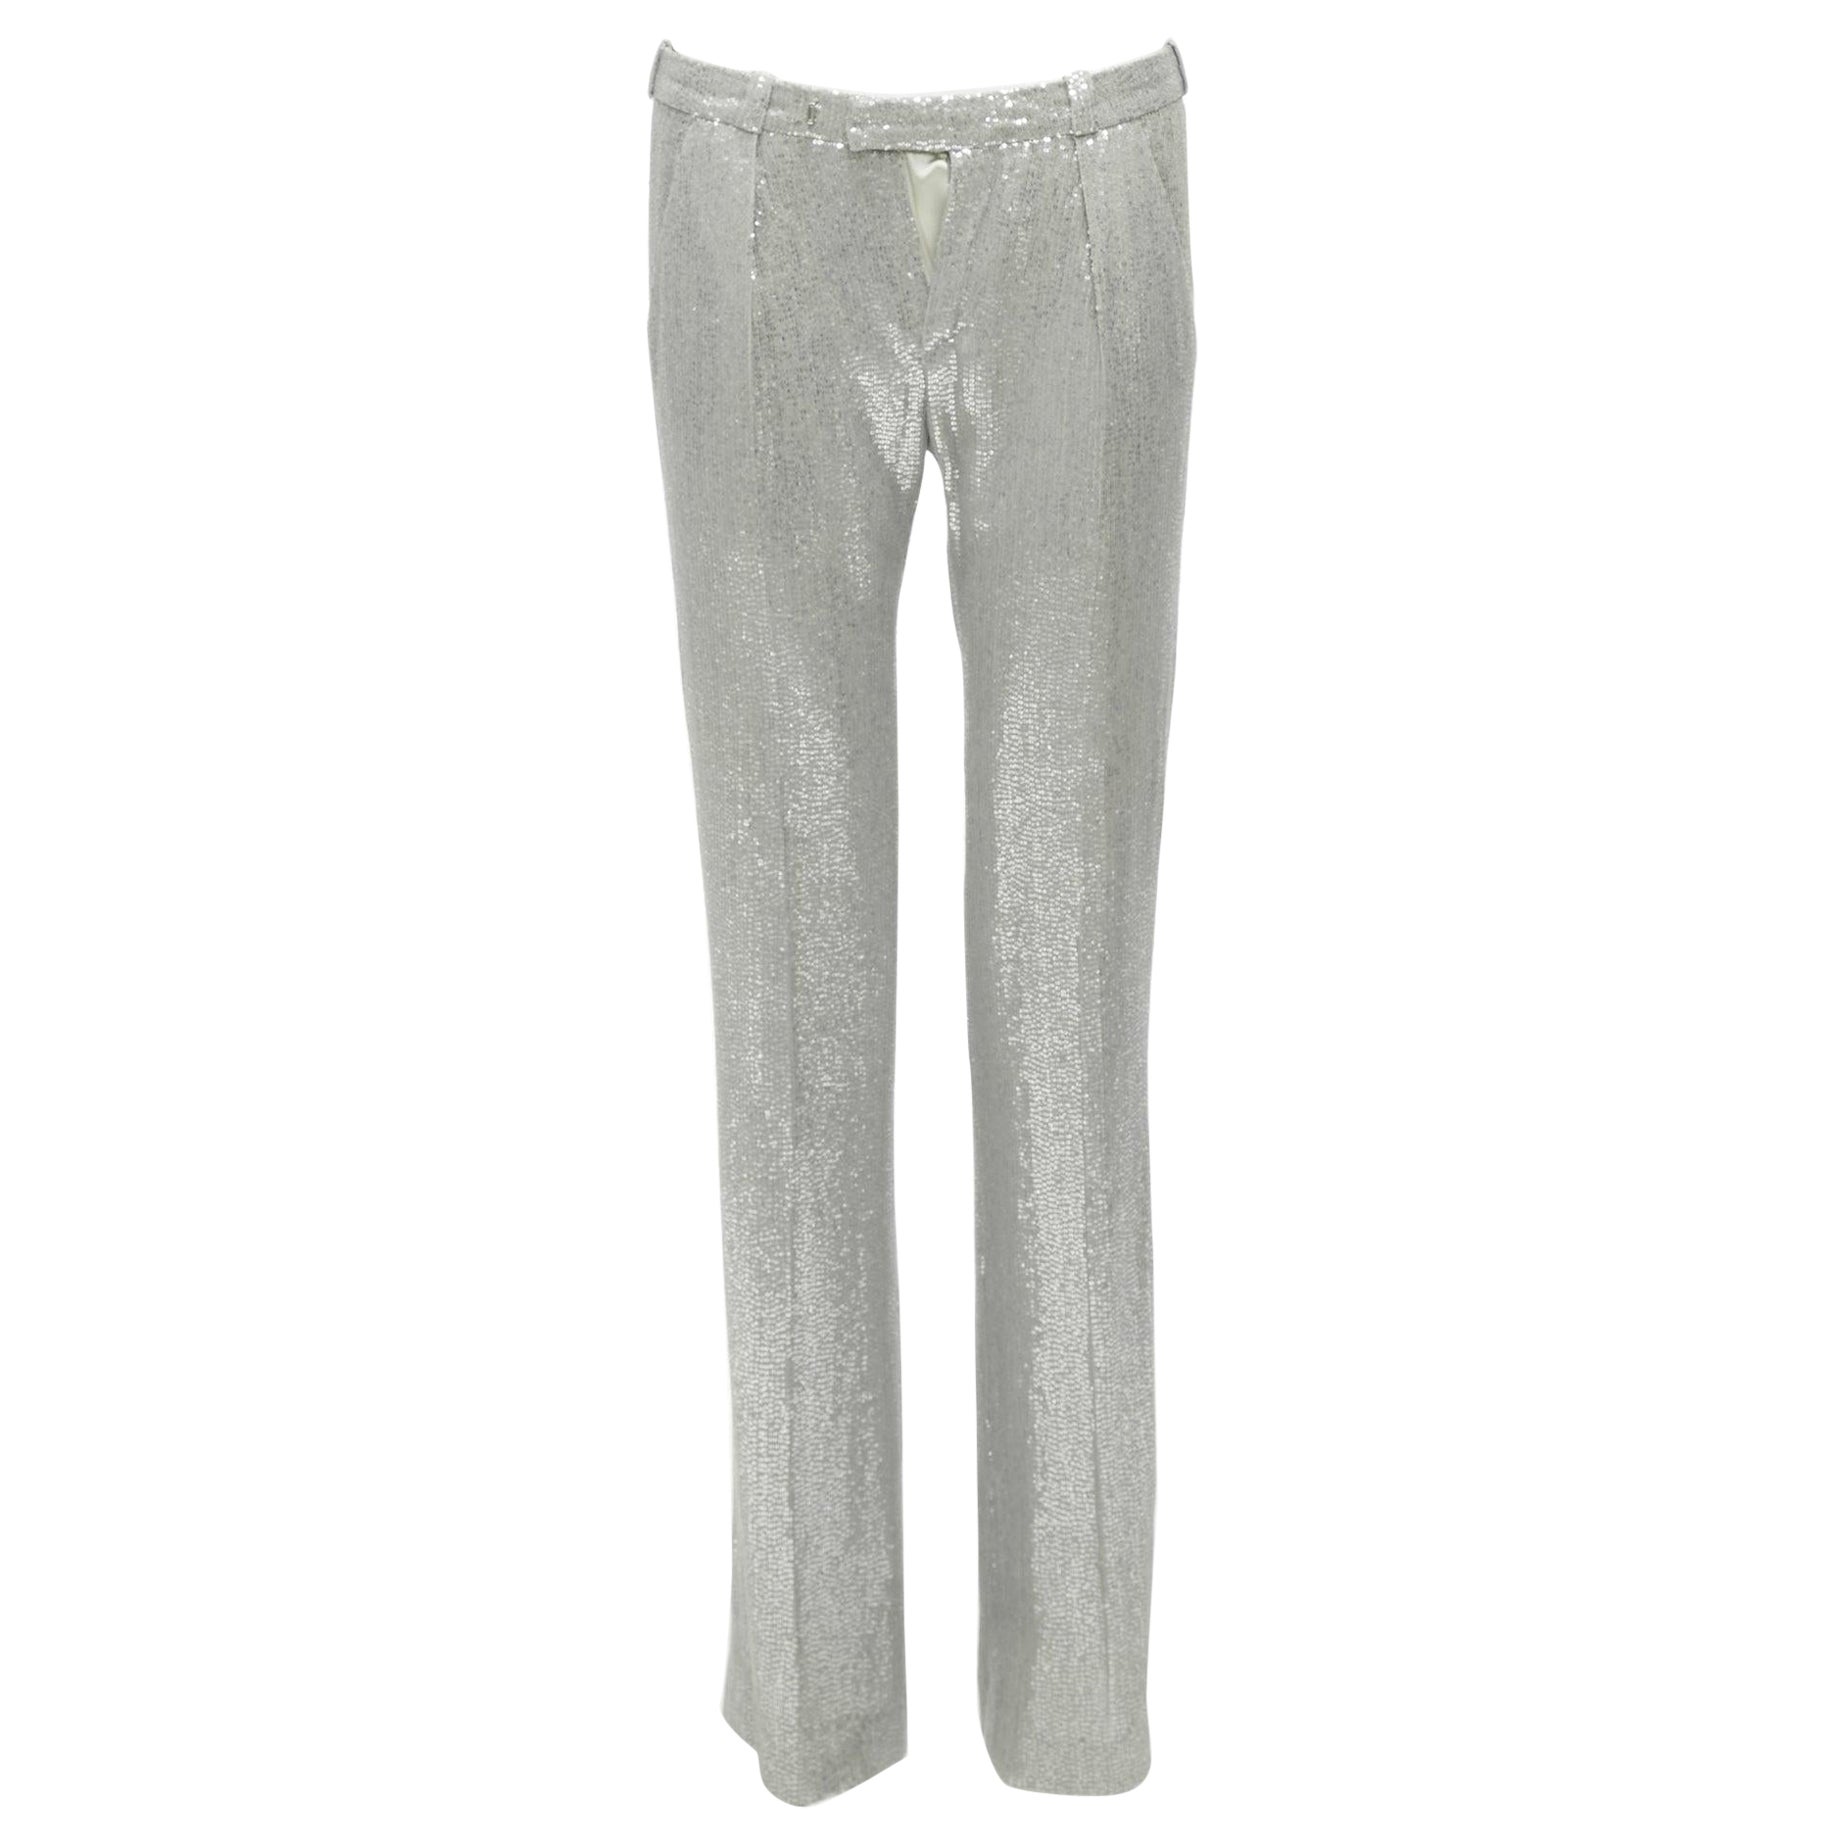 ALEXIS MABILLE 100% silk silver sequinned straight leg trouser pants FR36 S For Sale